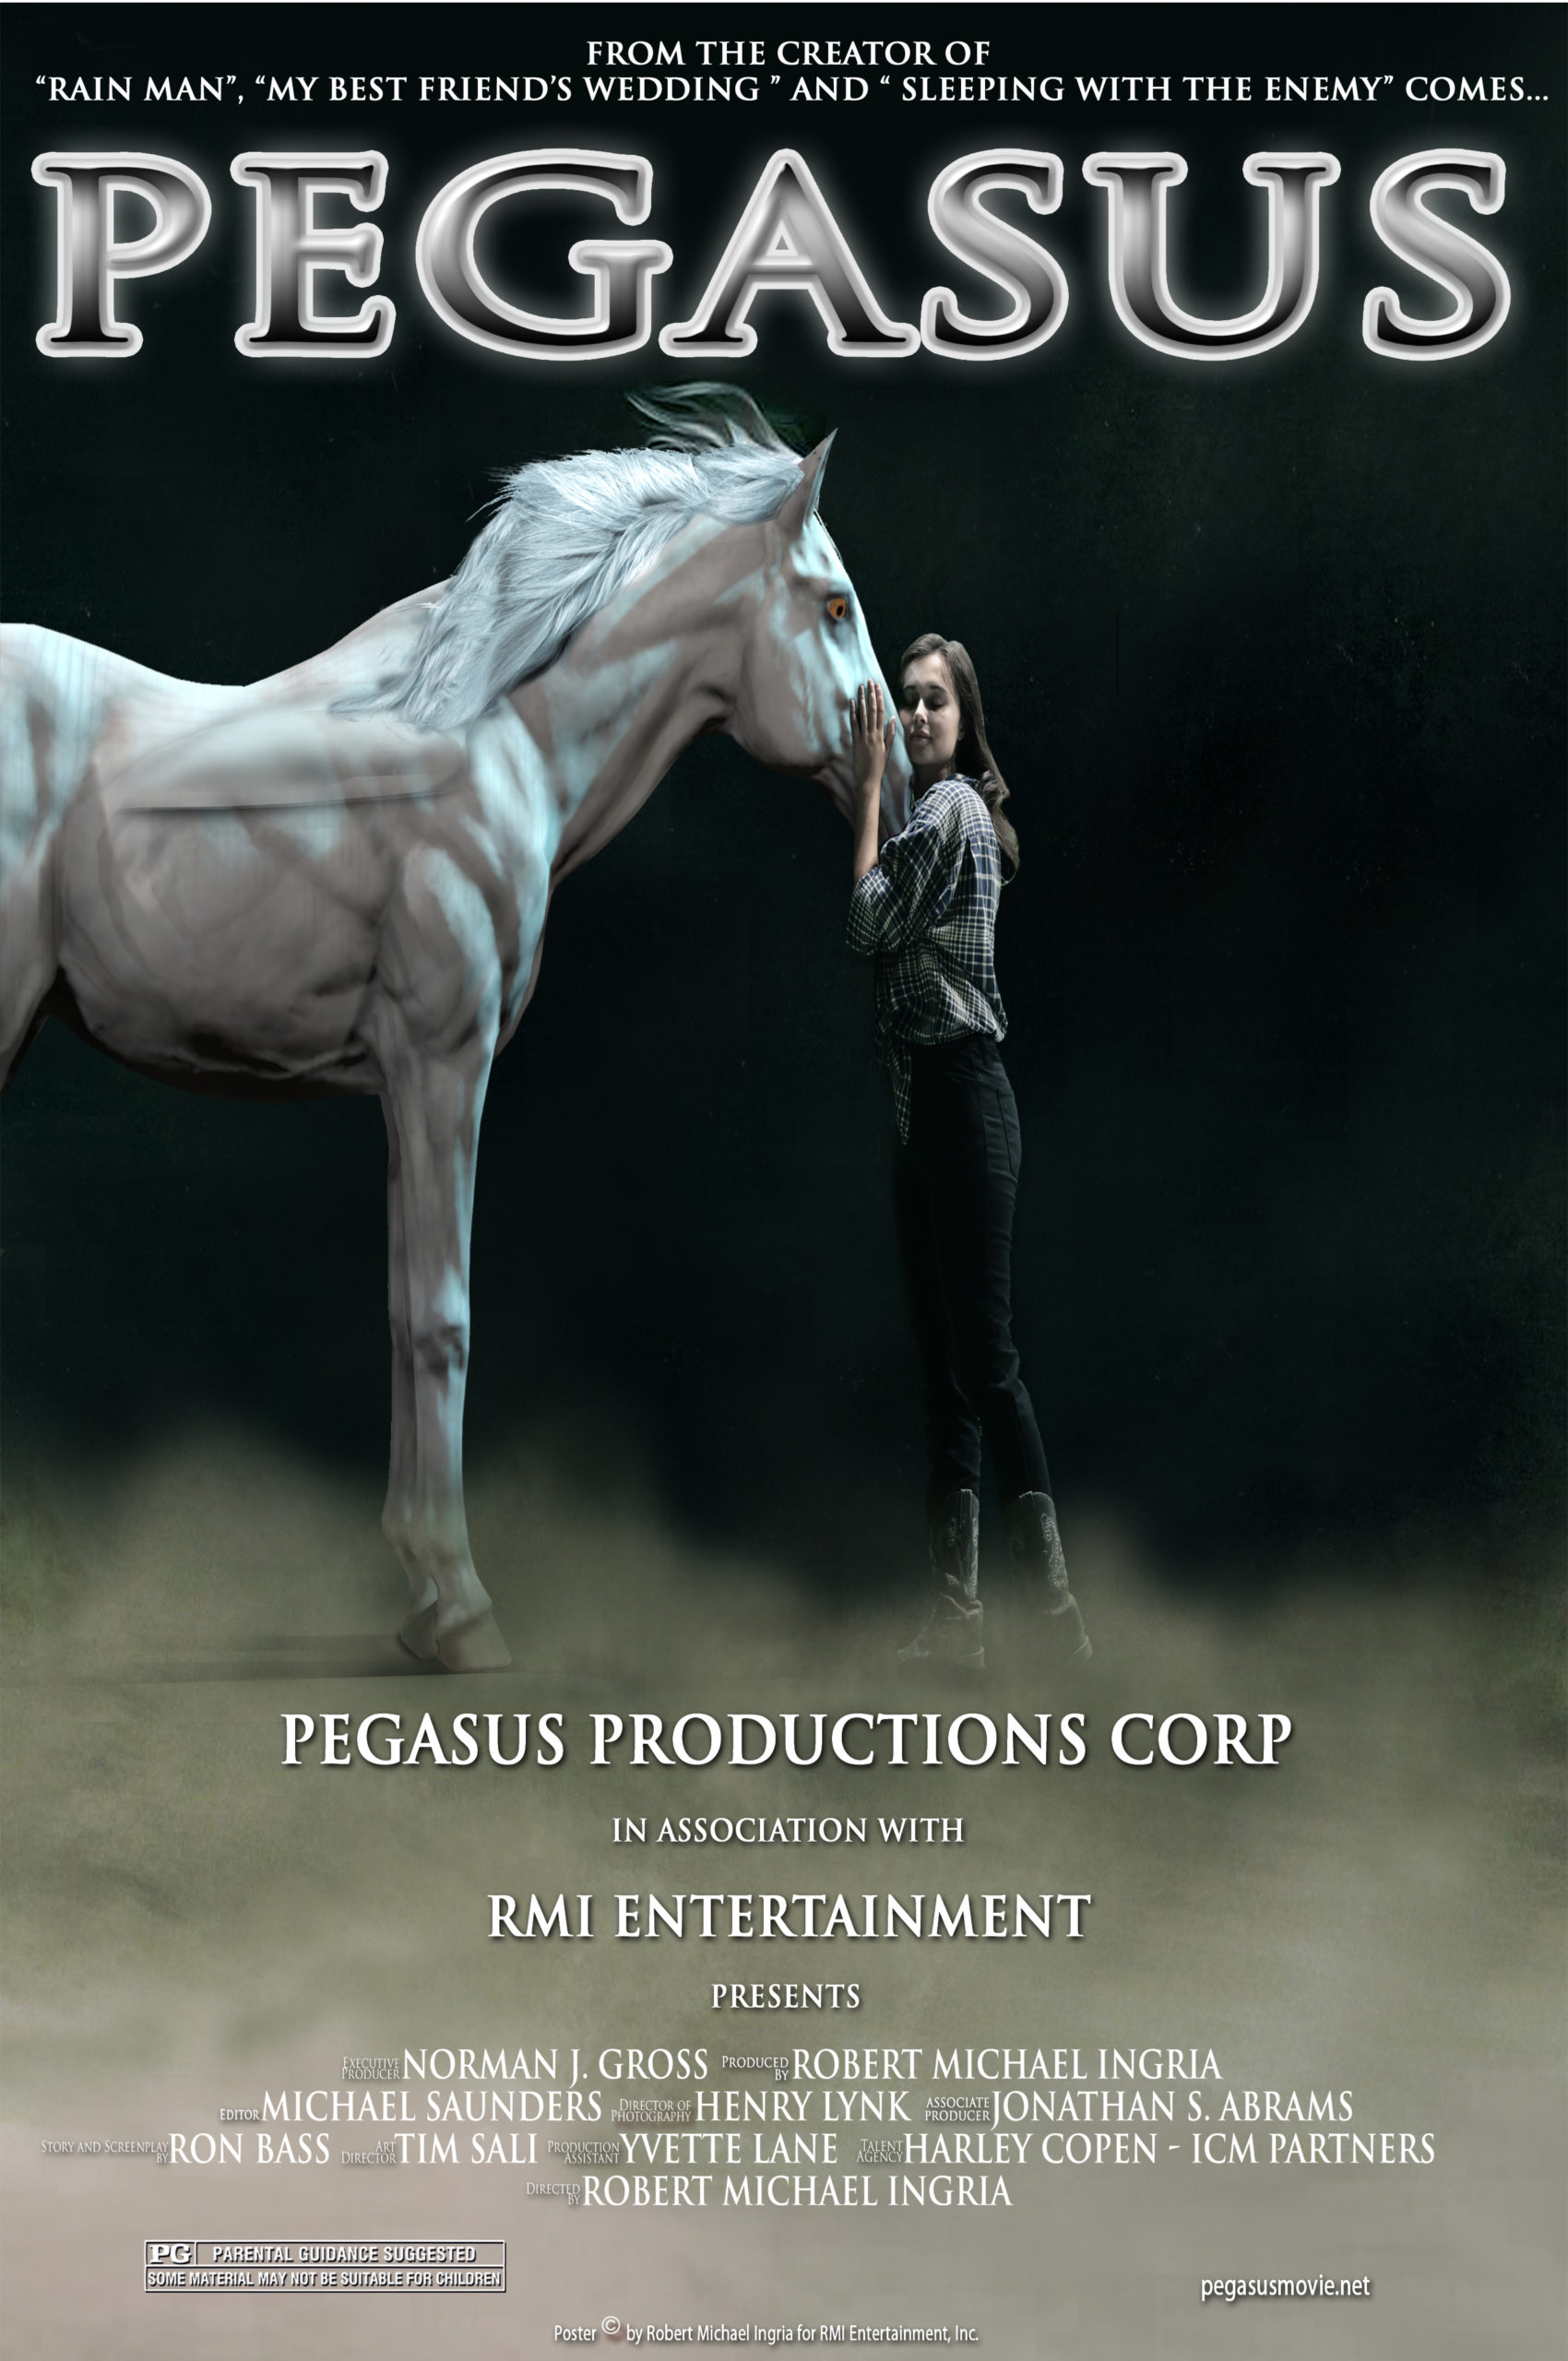 movie production company with pegasus